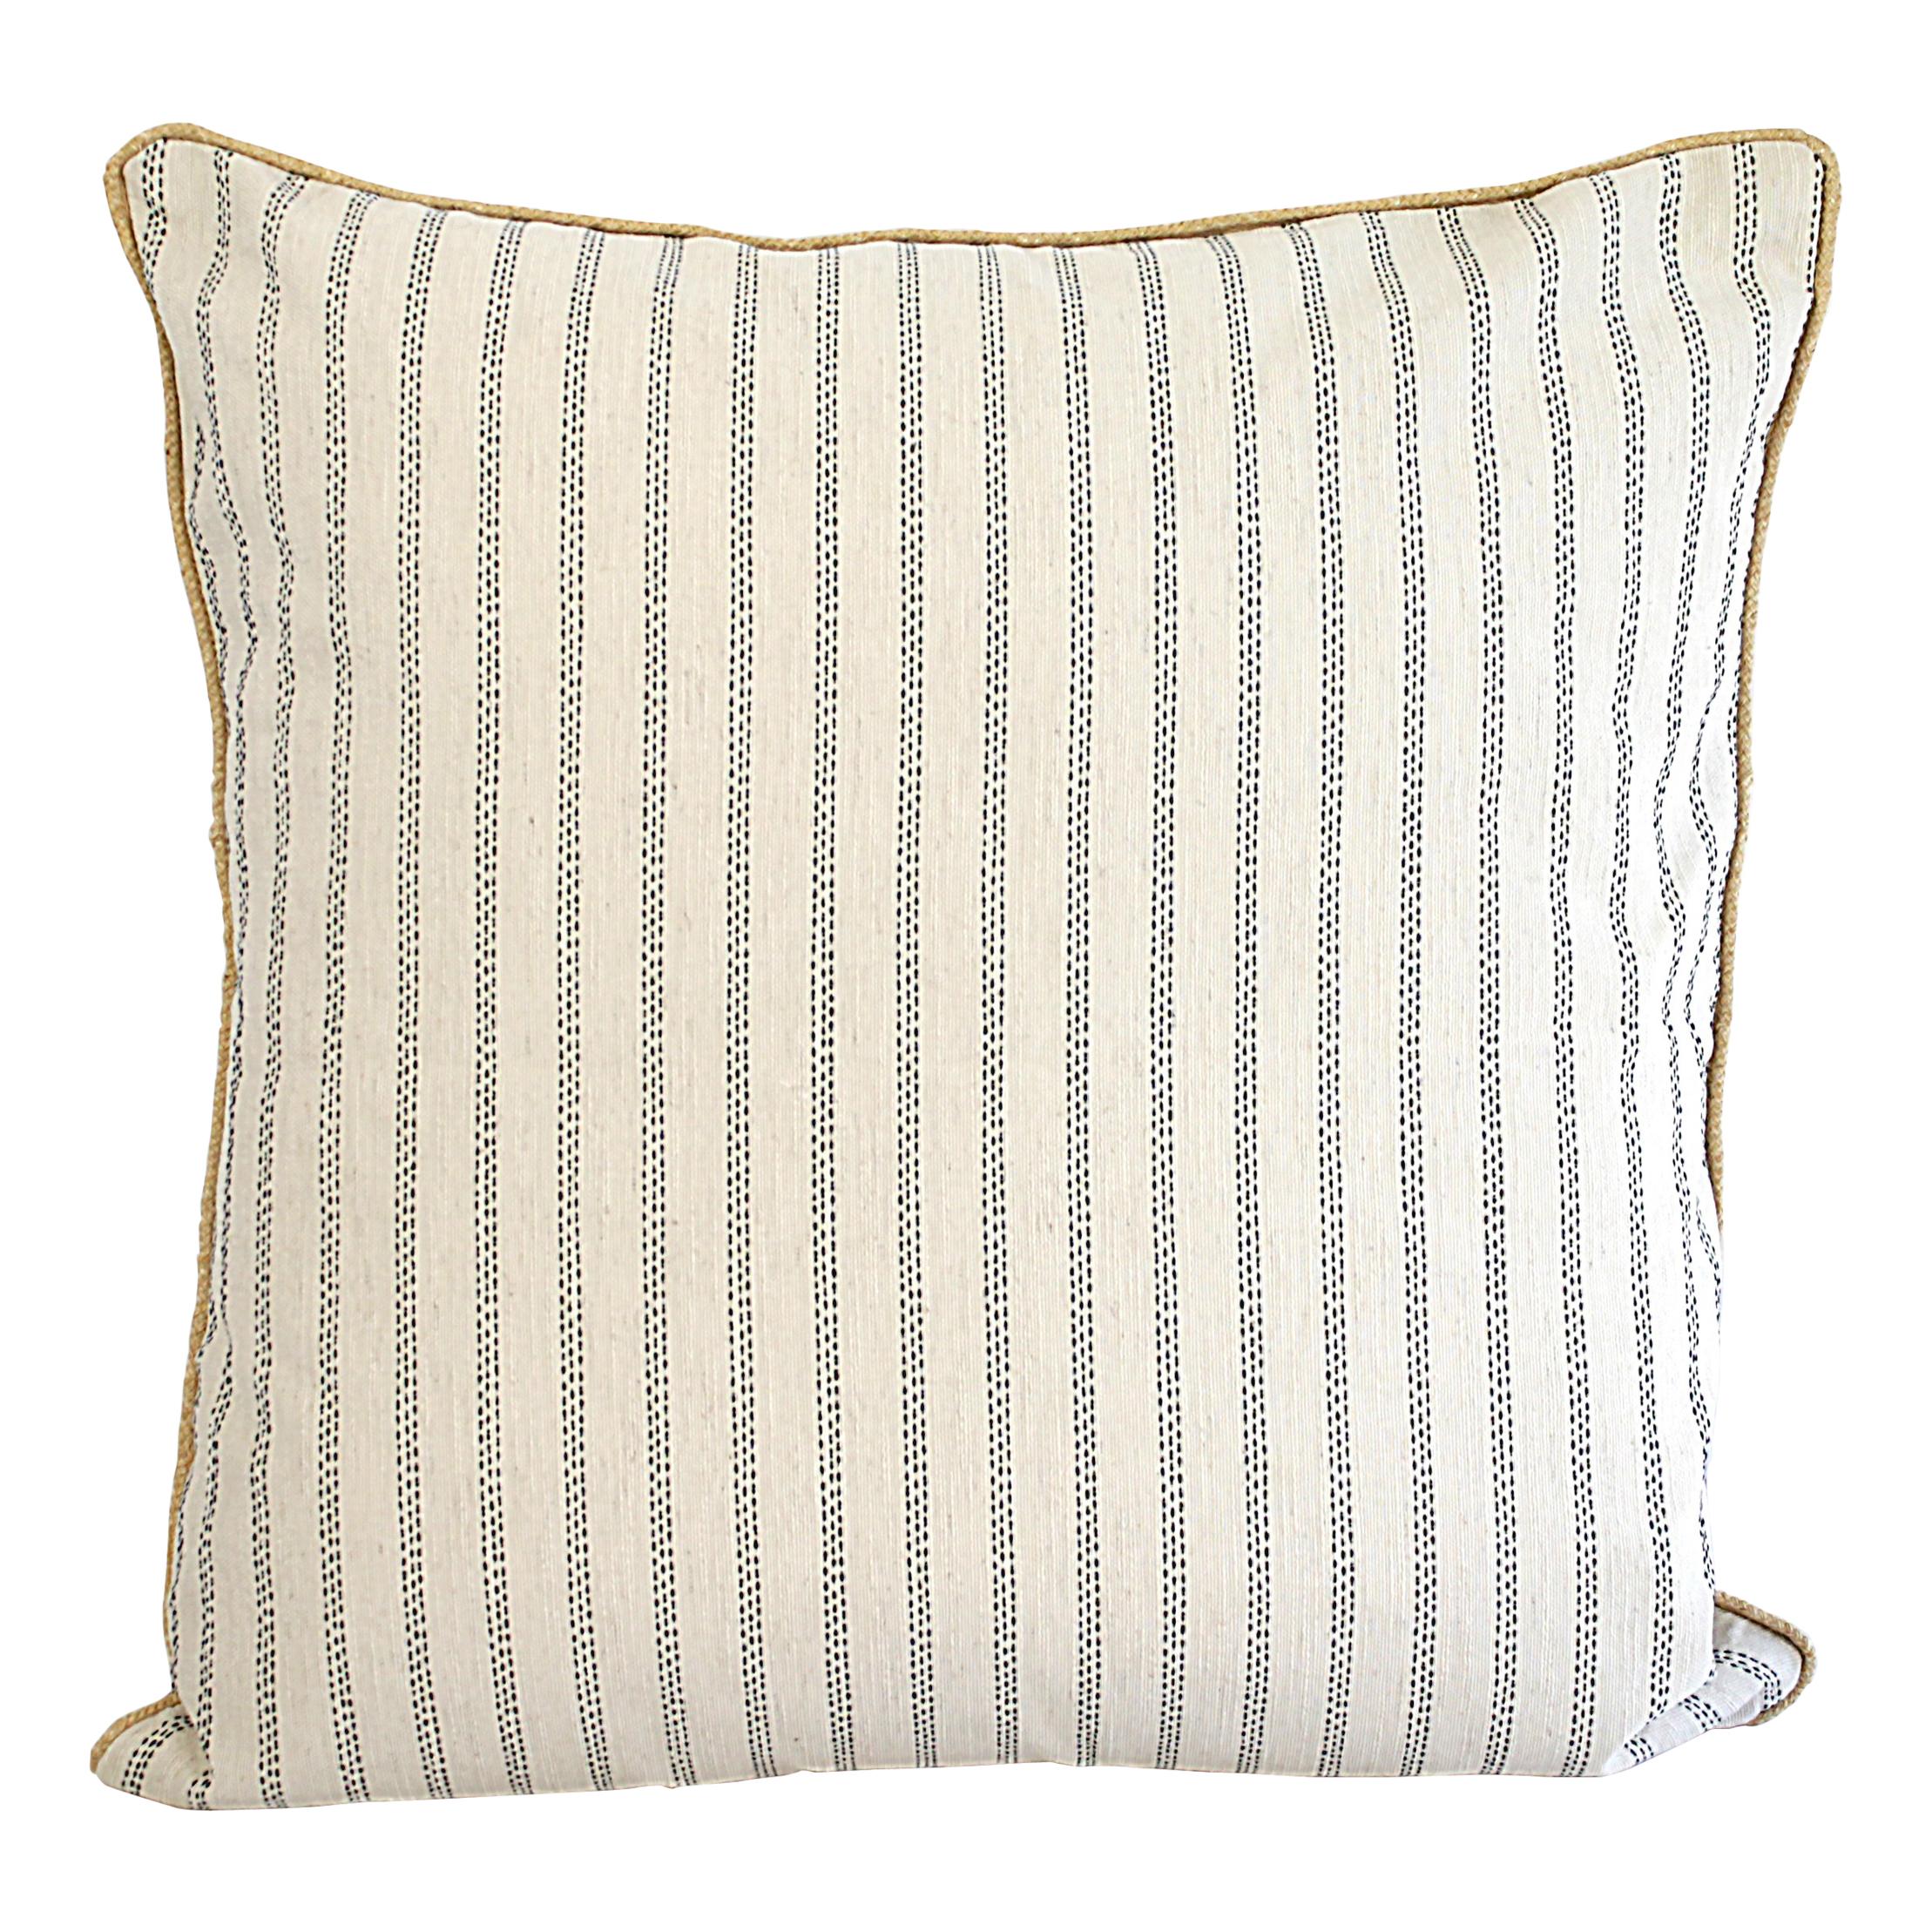 Custom Natural and Navy Ticking Stripe Pillow with Braided Jute Cord